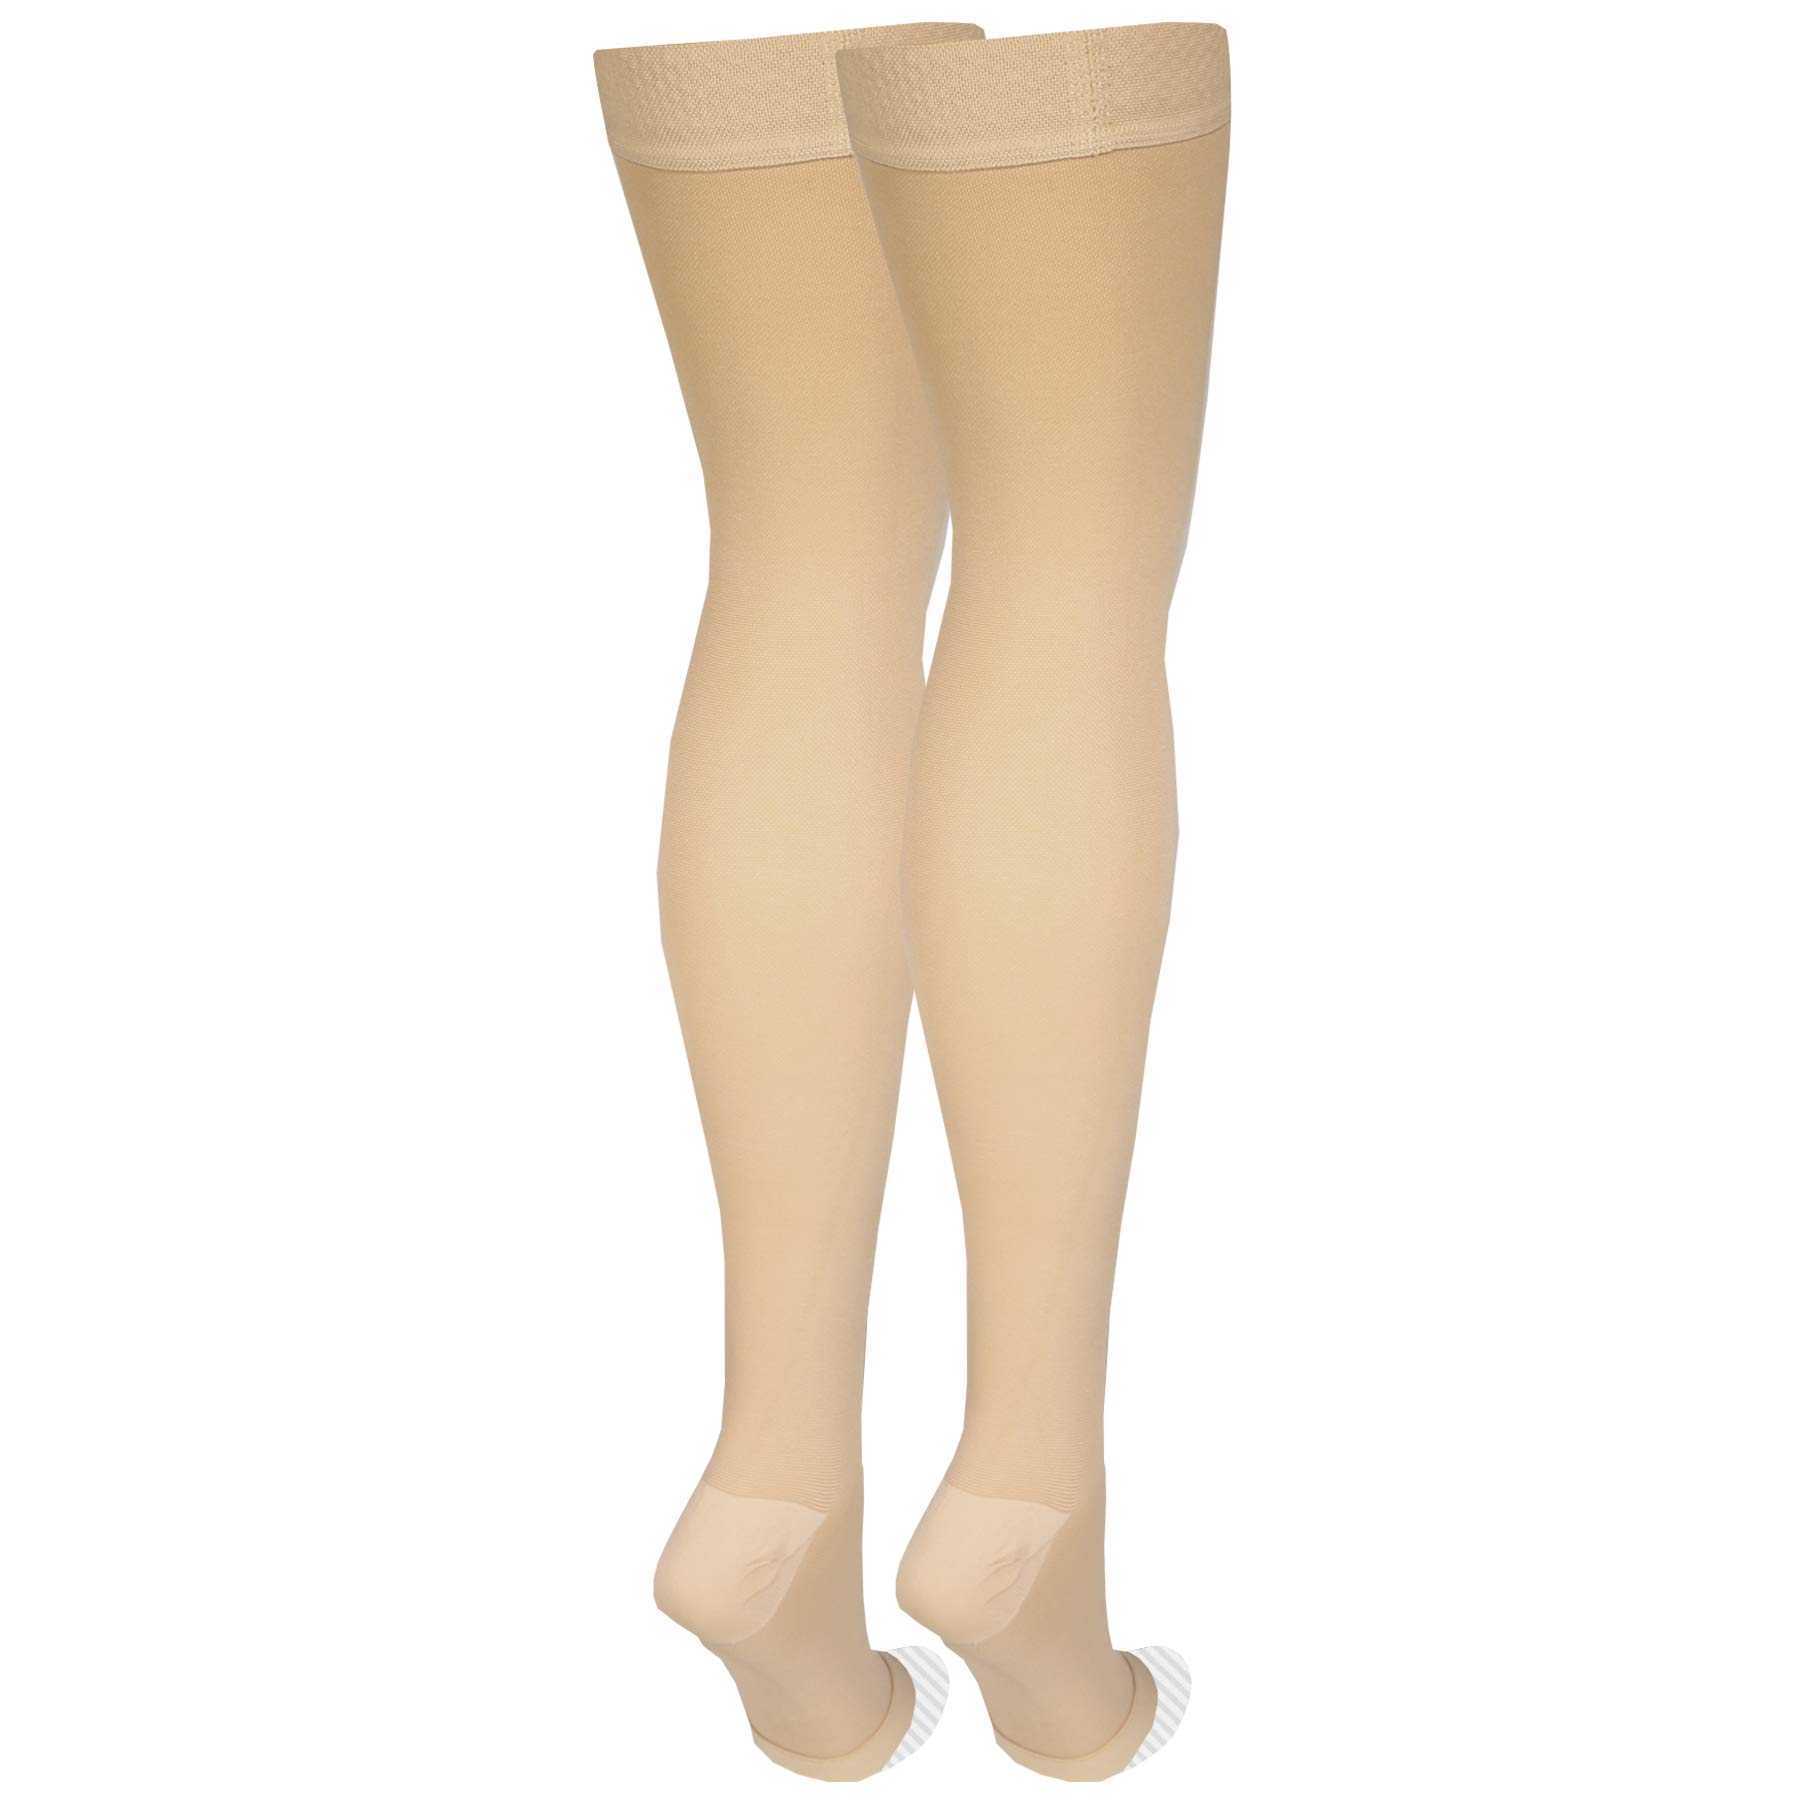 Amazon Basic Care Medical Compression Stockings, 20-30 mmHg Support, Women & Men Thigh Length Hose, Open Toe, Beige, 2X-Large (Previously NuVein)